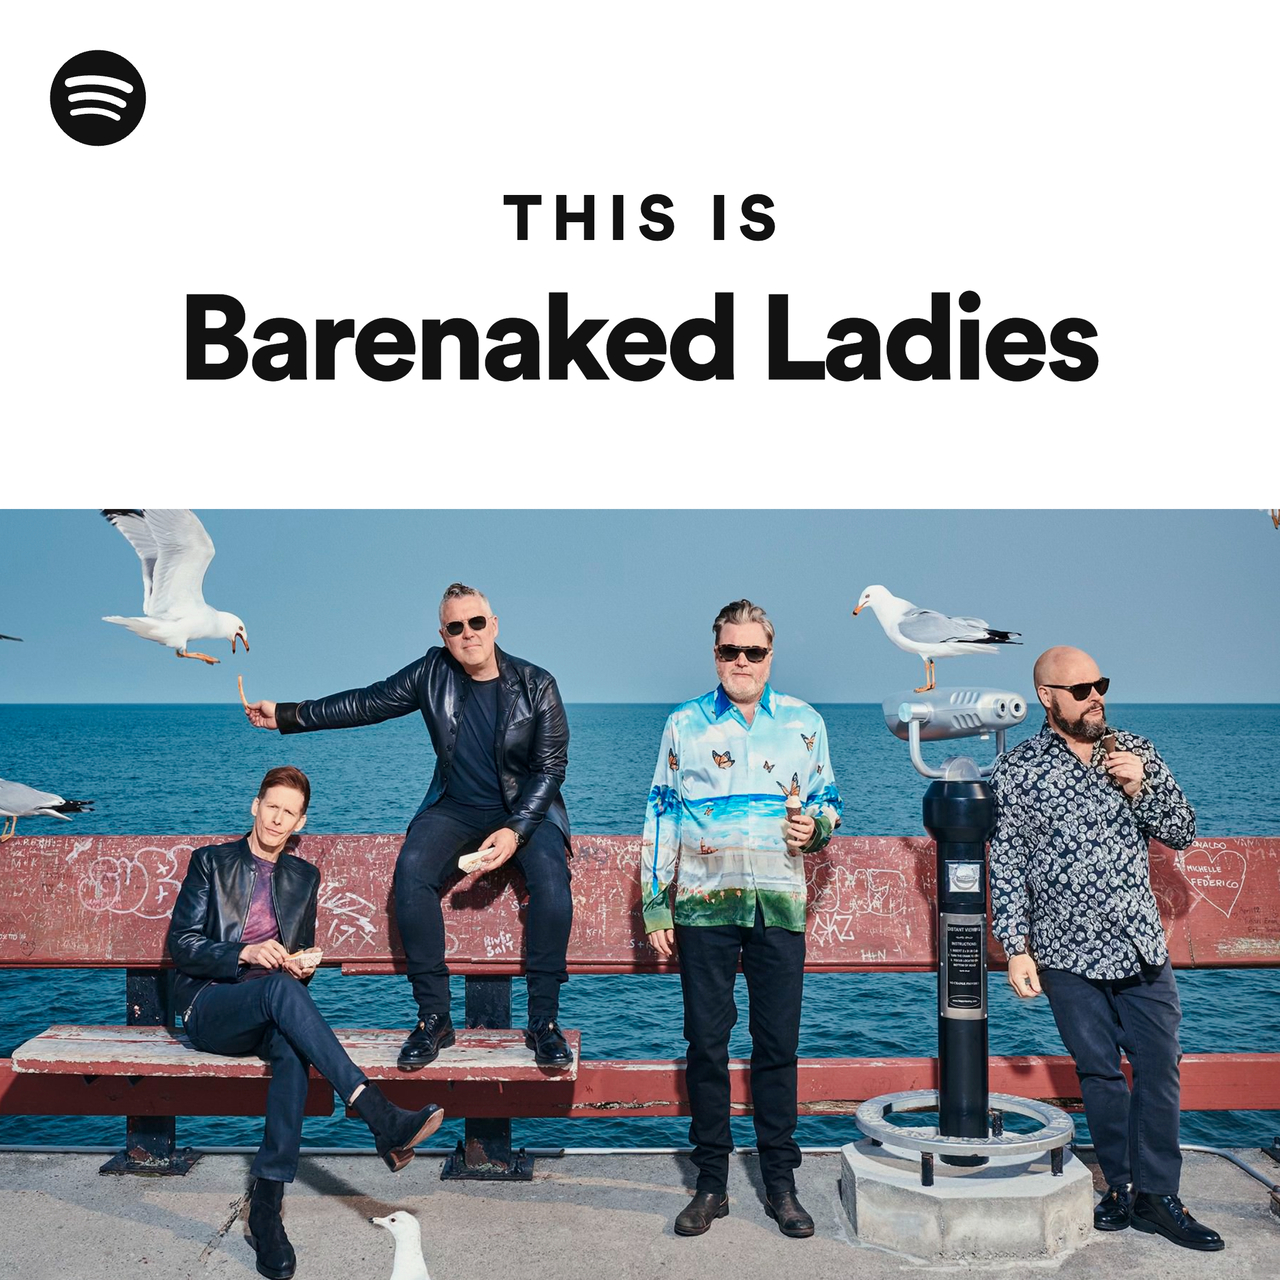 This Is Barenaked Ladies - playlist by Spotify | Spotify